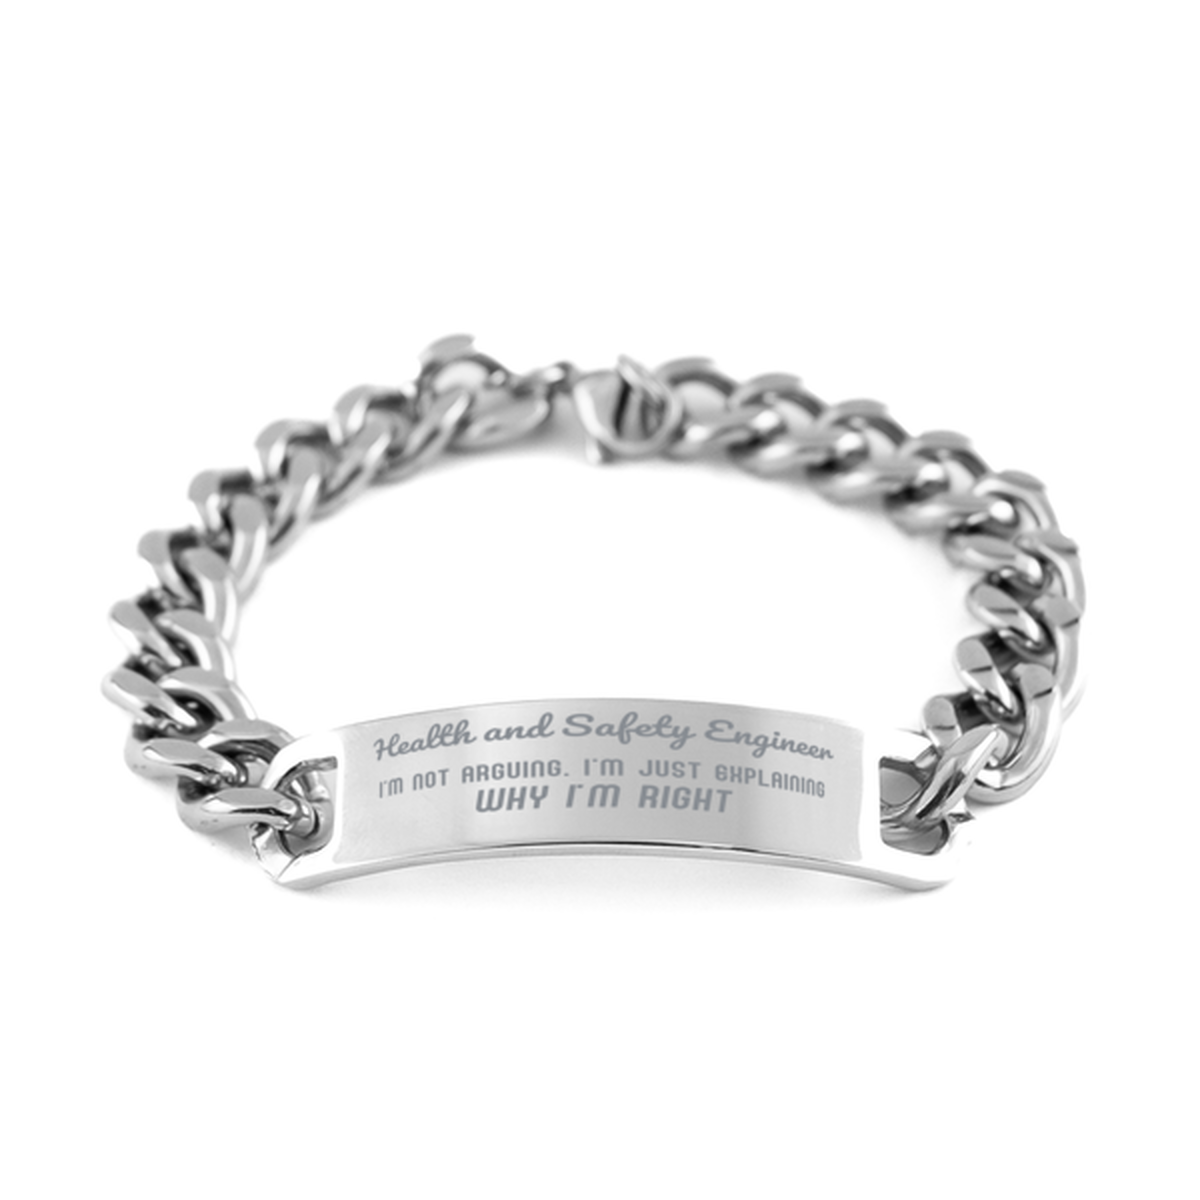 Health and Safety Engineer I'm not Arguing. I'm Just Explaining Why I'm RIGHT Cuban Chain Stainless Steel Bracelet, Graduation Birthday Christmas Health and Safety Engineer Gifts For Health and Safety Engineer Funny Saying Quote Present for Men Women Cowo